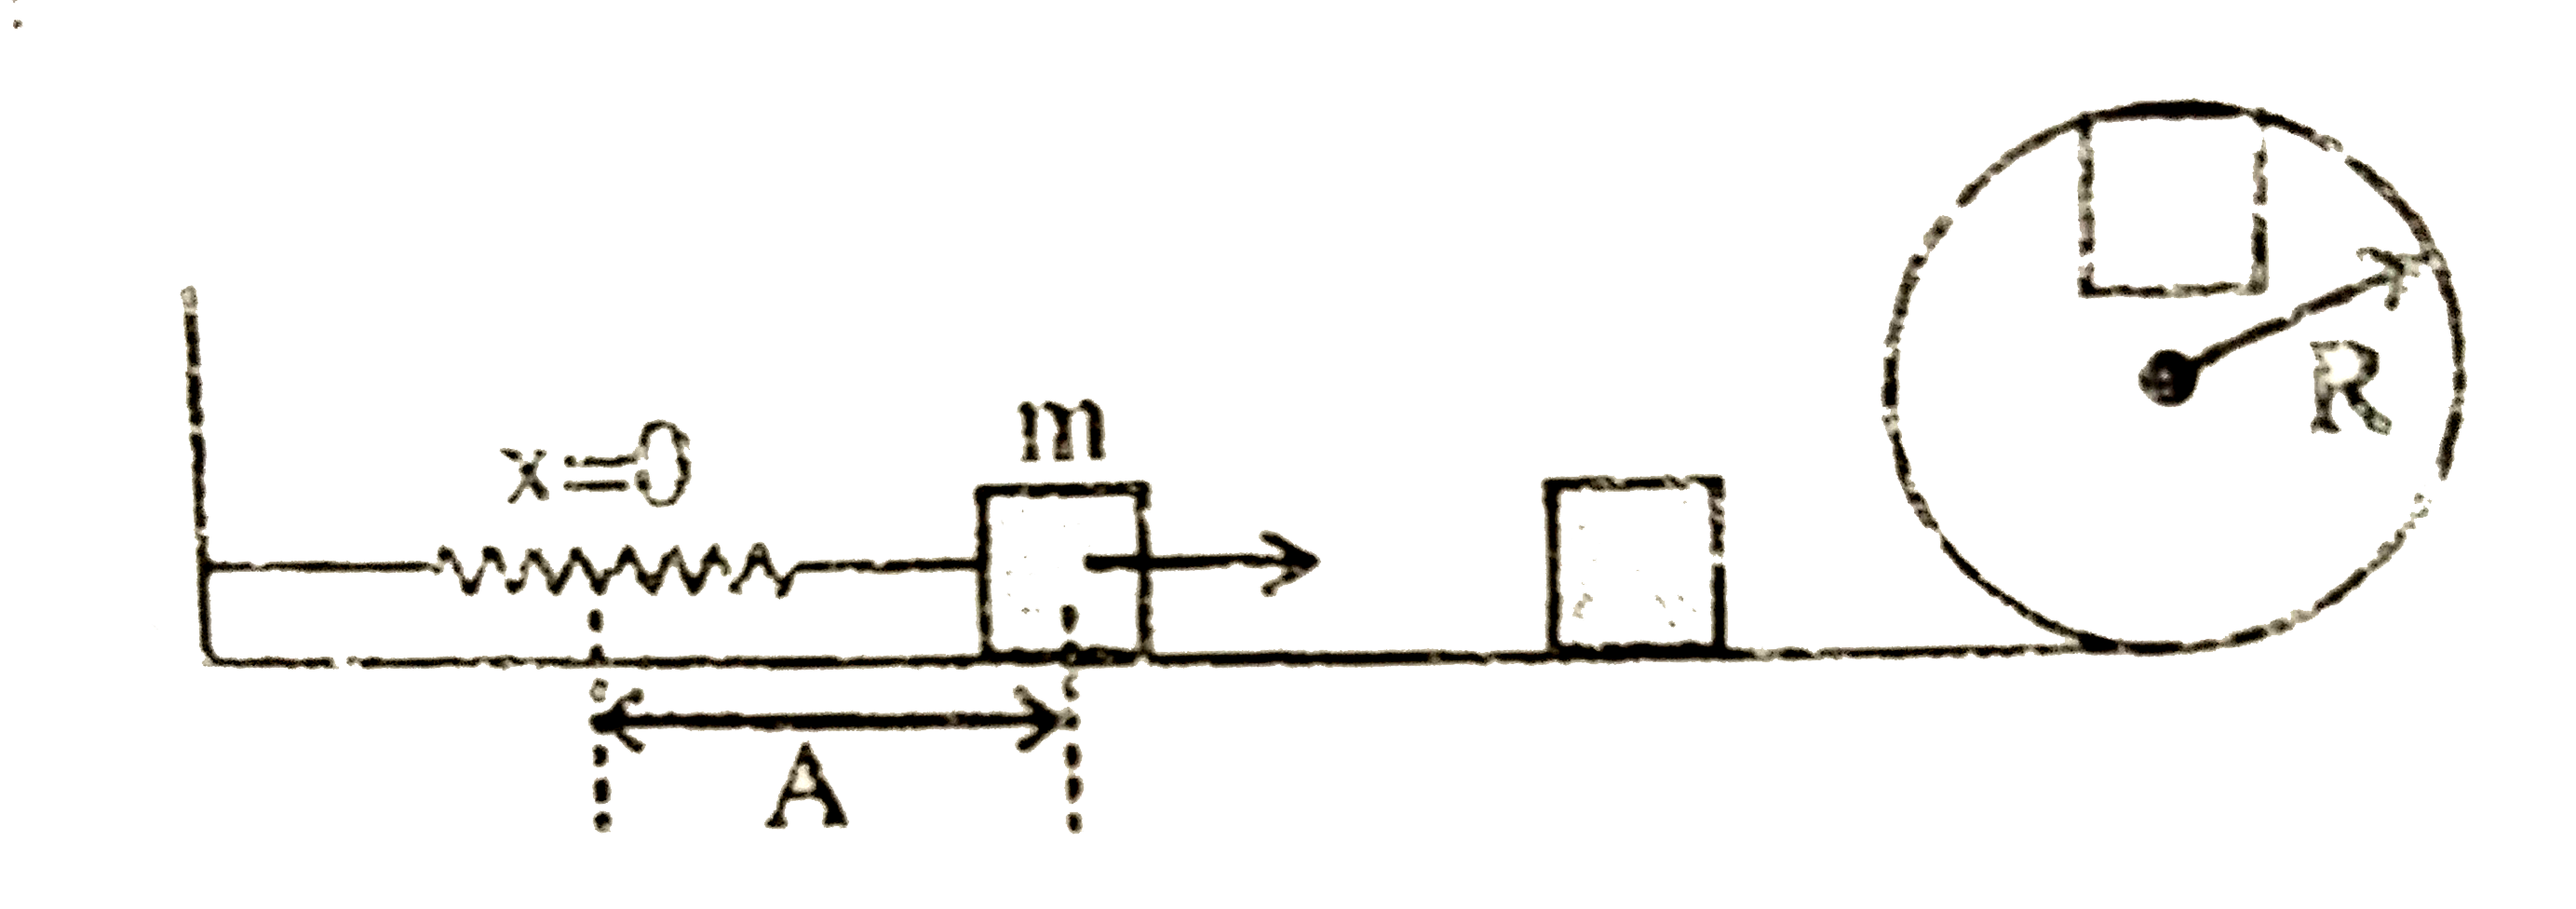 A block of mss m is placed on a level frictionless table. The block is attached to a horizontally aligned spring fixed with its other end and is vibrating in a horizontal with the pariod T. Suddenly at the instant of time when the spring comes to the position of euilibrium and becomes unstretched the block disconnects form the spring and continues sliding across the frictionless surface away from the until it encounters loop of radius R. What must be the amplitude of vibrations of the block s on the spring in order for the block to complets one loop without falling down?